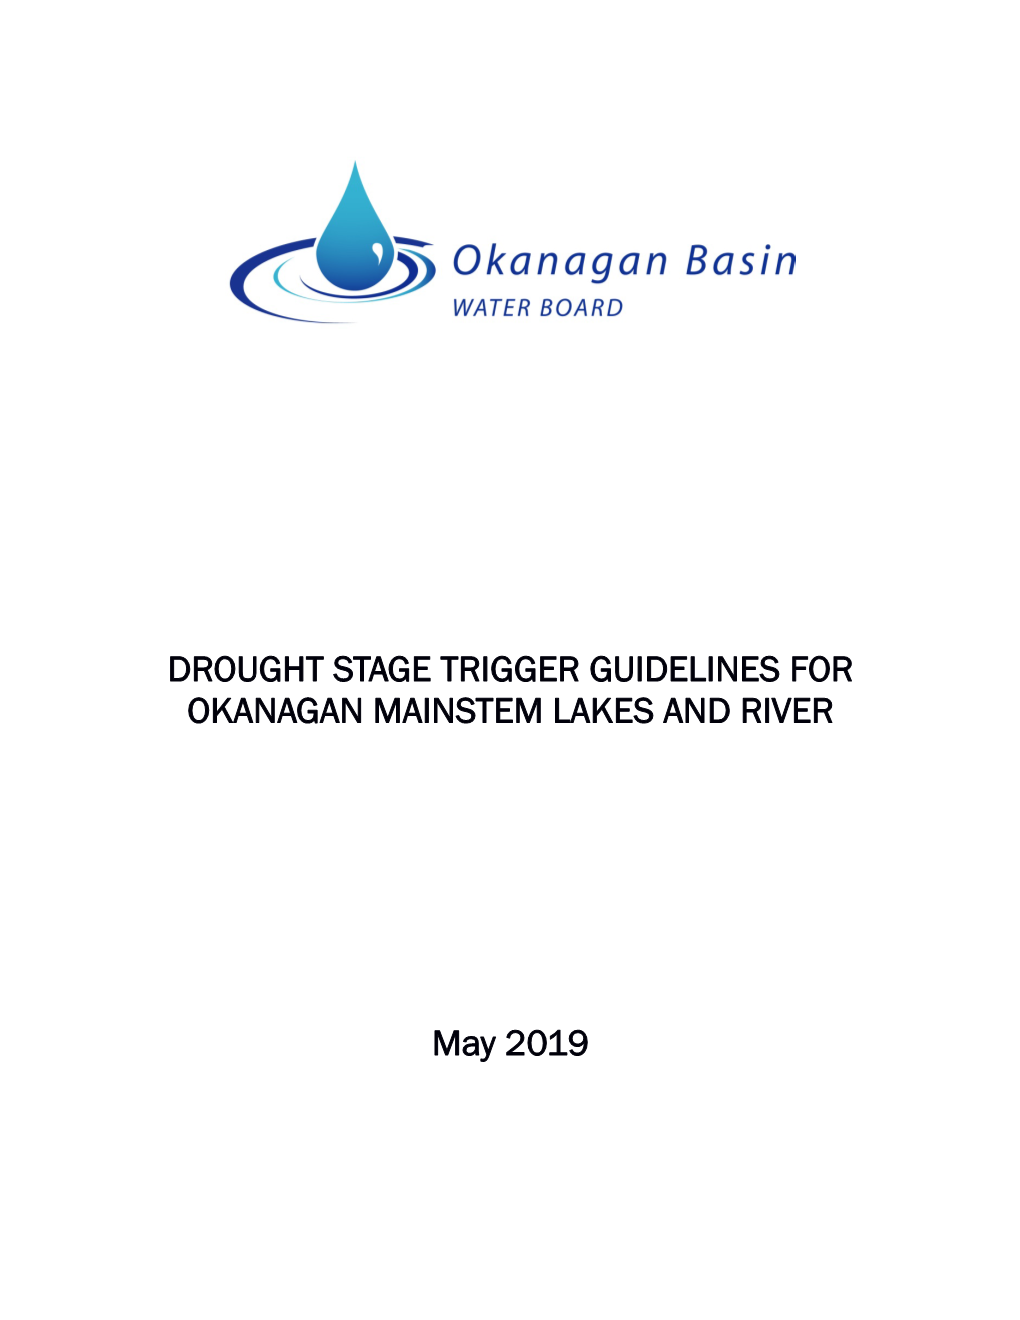 Drought Stage Trigger Guidelines for Okanagan Mainstem Lakes and River